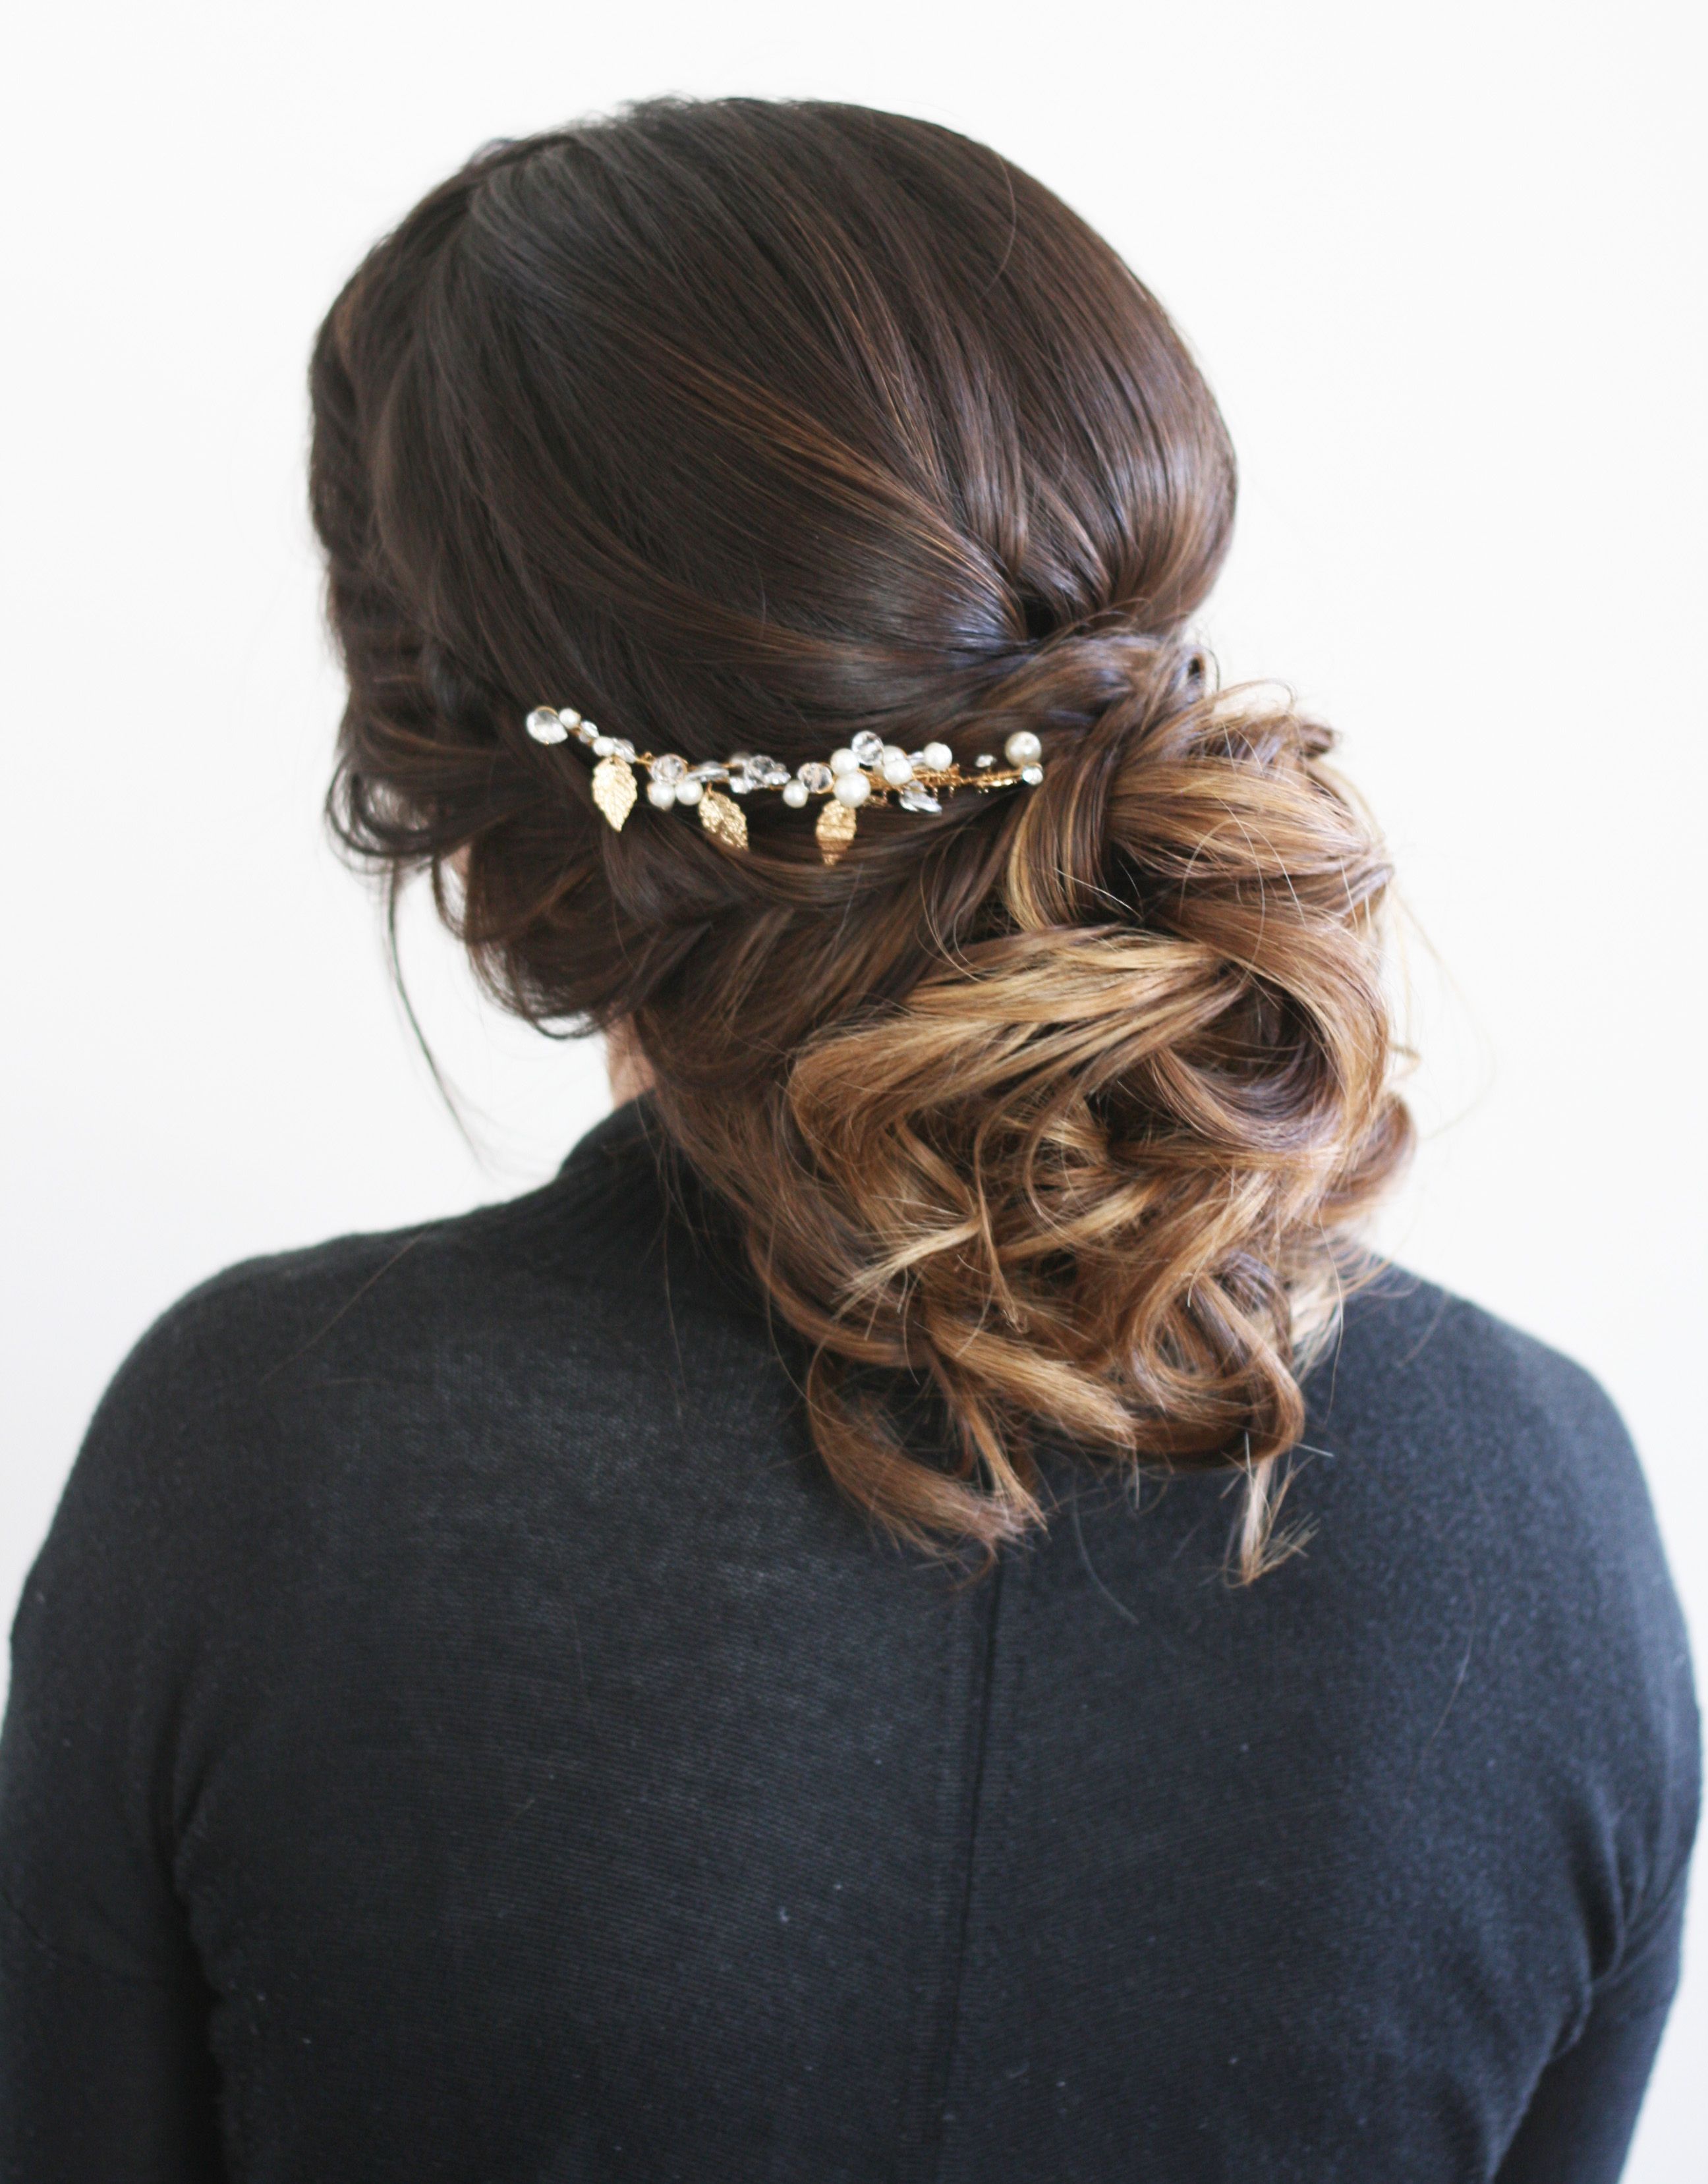 The Pertaining To Latest Sectioned Twist Bridal Hairstyles (View 10 of 20)